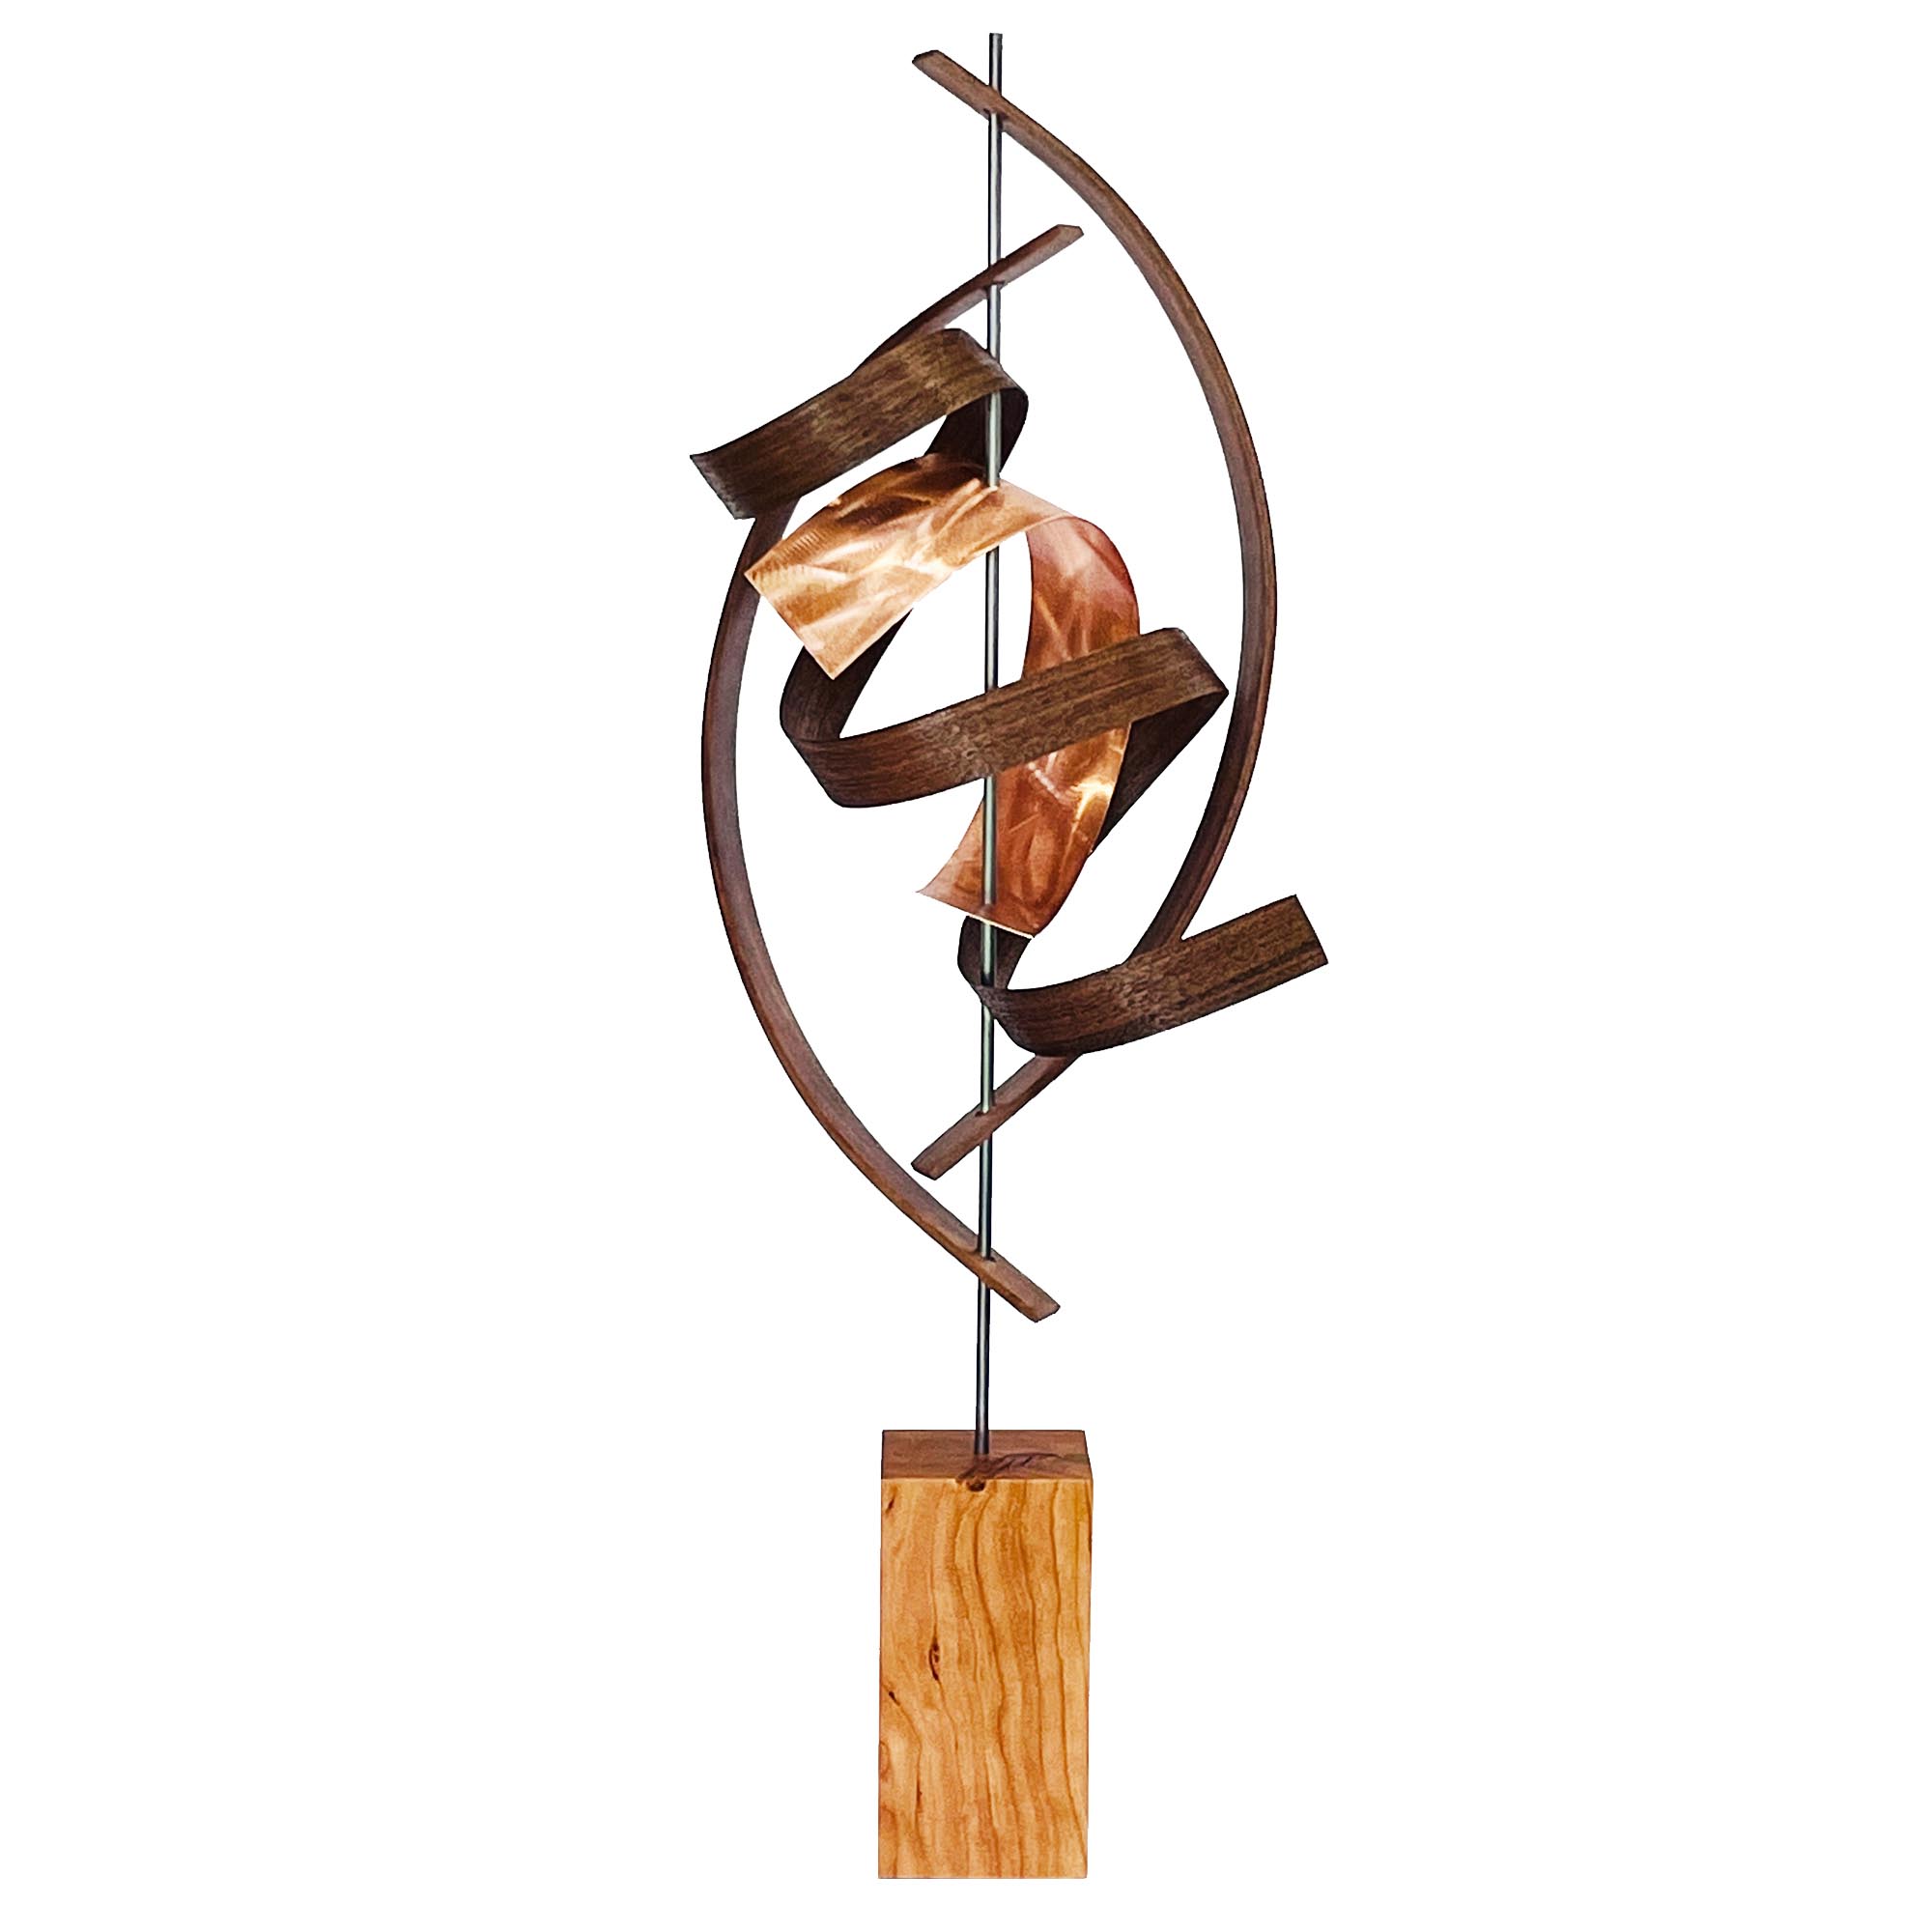 Jackson Wright 'Sprung' 12in x 32in Contemporary Style Abstract Wood Sculpture